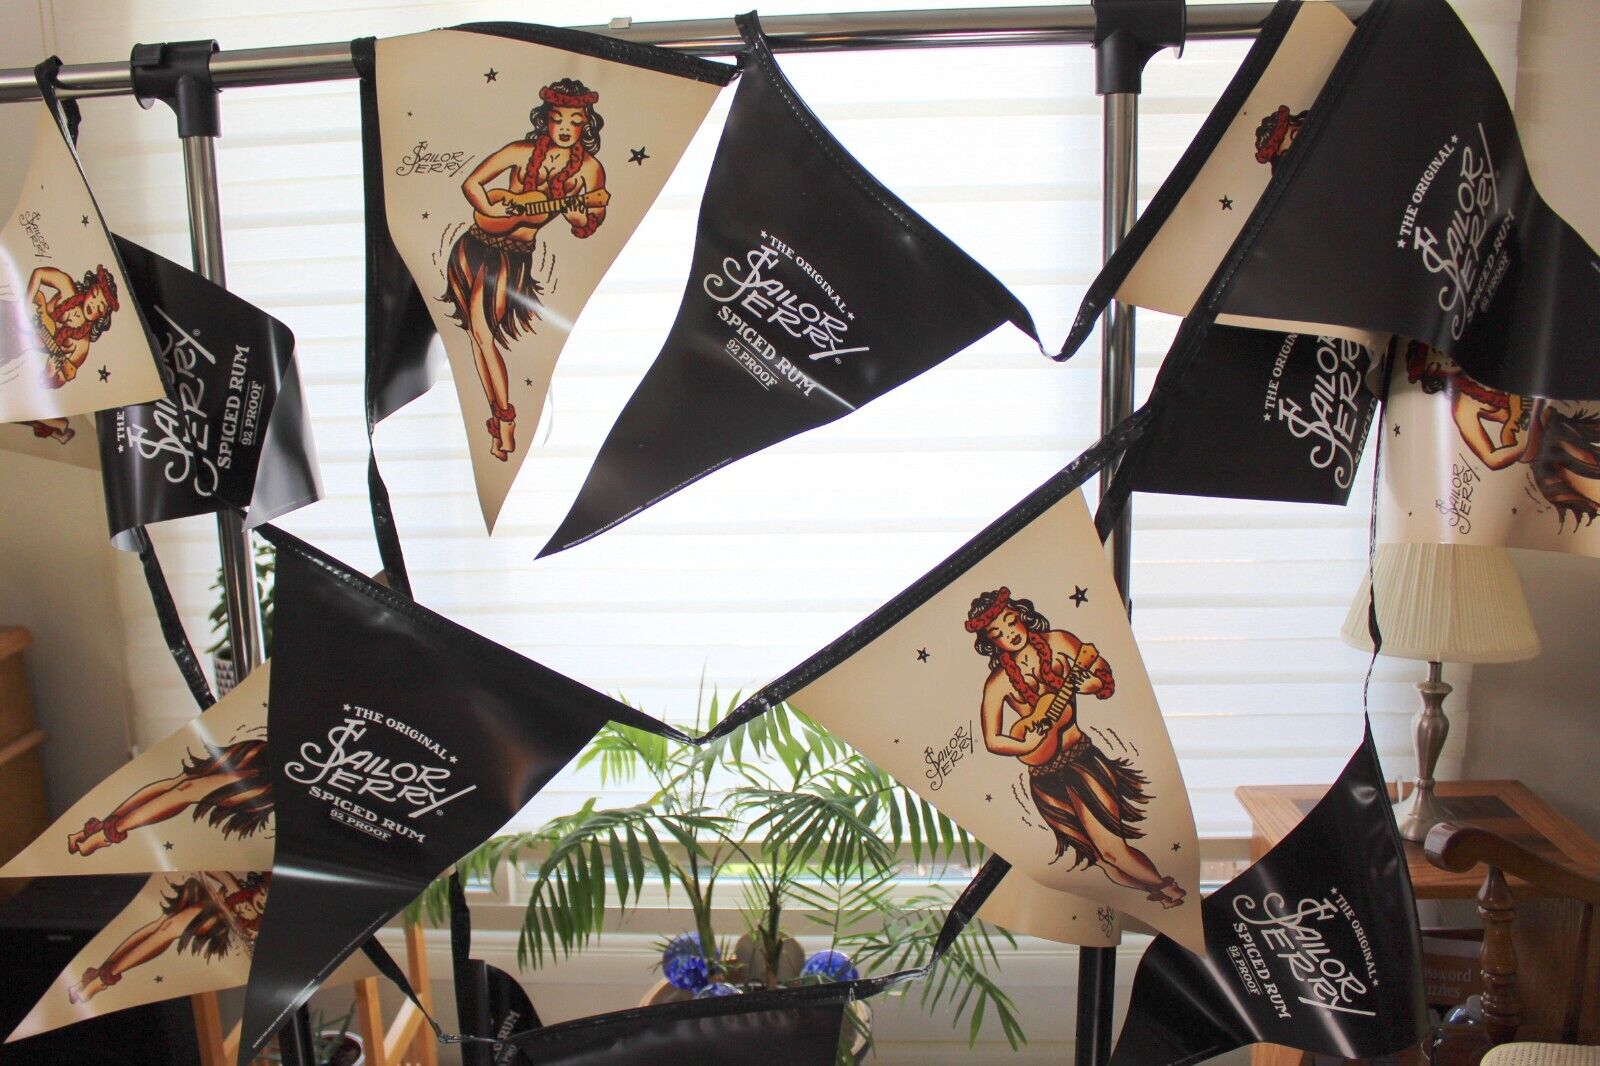 Sailor Jerry Spiced Rum Hula Girl Banner - 30 Ft Long